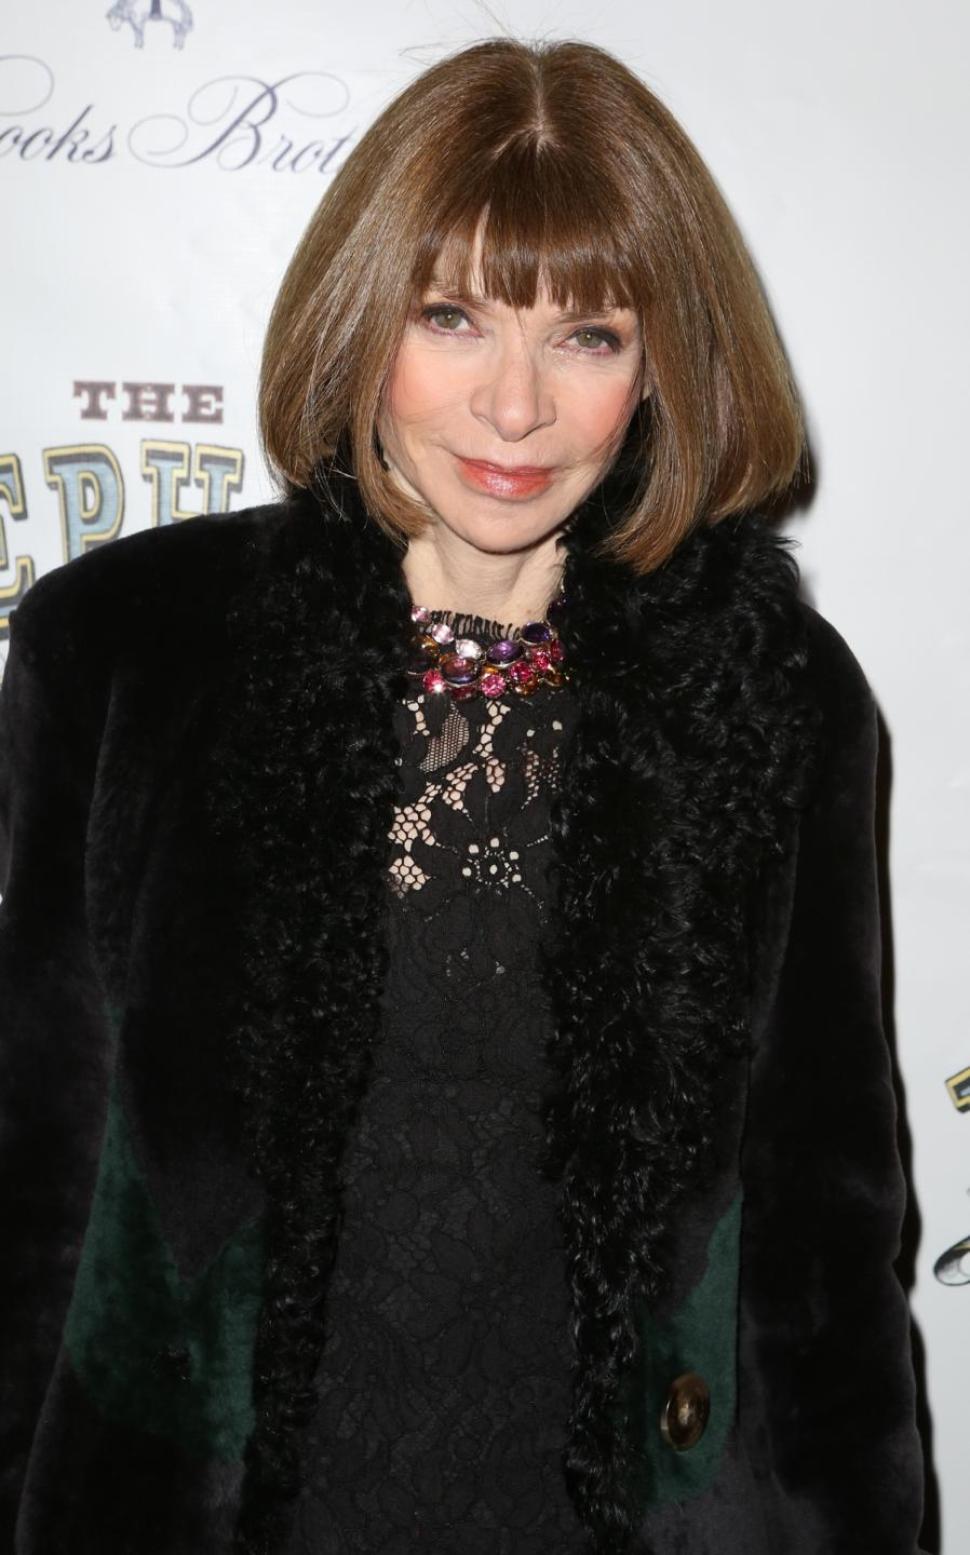 Anna Wintour was spotted giggling up a storm at Bathazar.